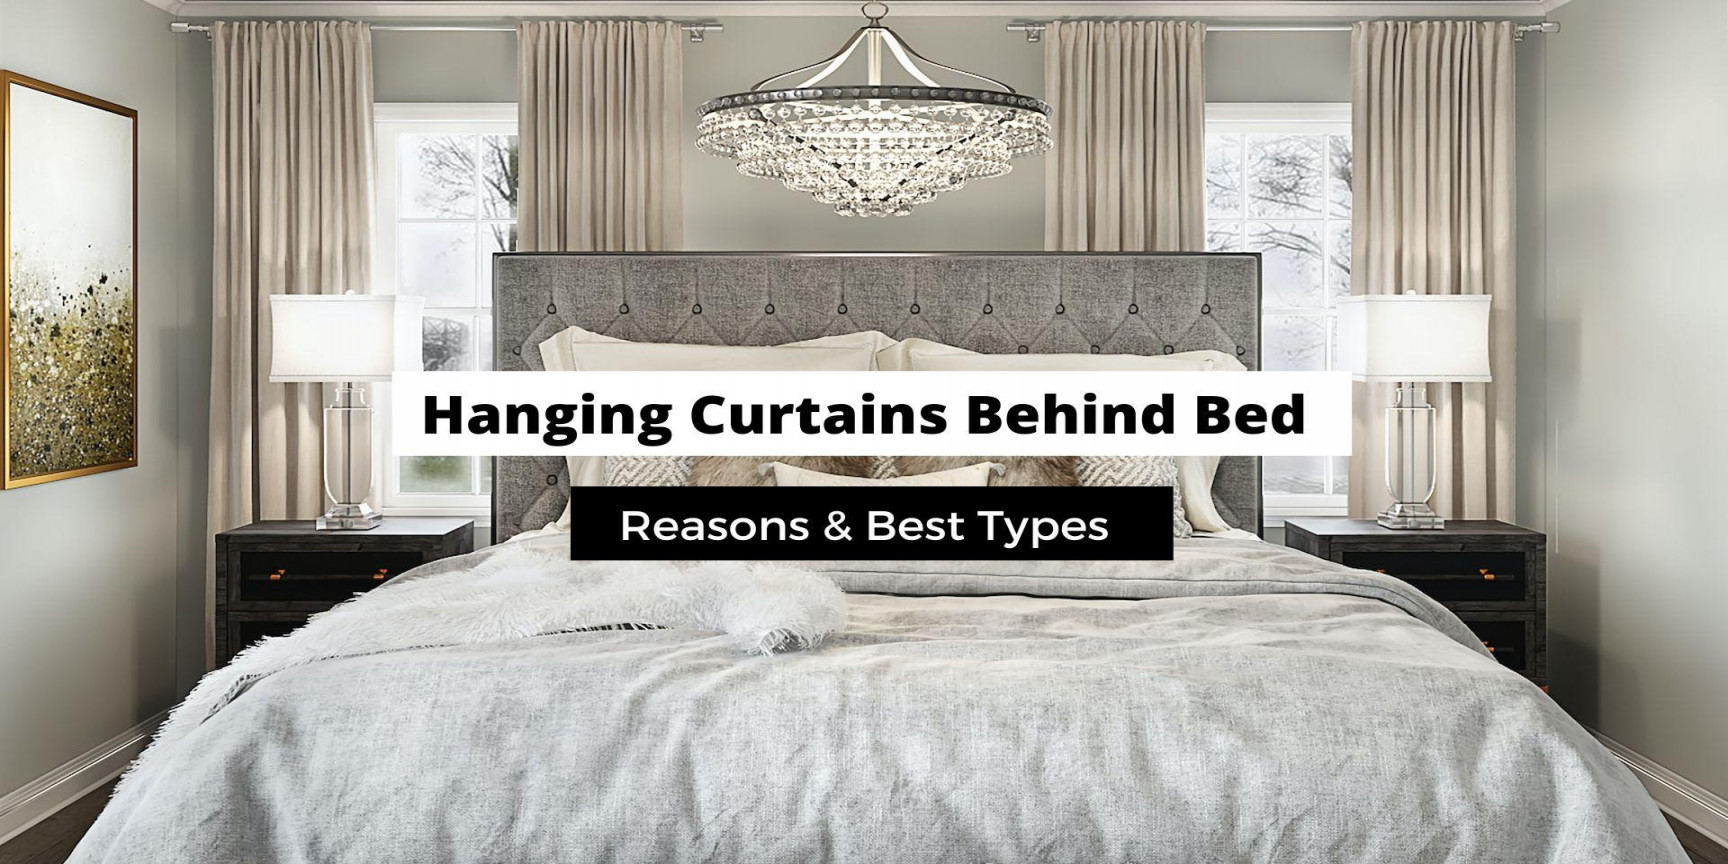 Hanging Curtains Behind A Bed: Best Types of Curtains - Craftsonfire